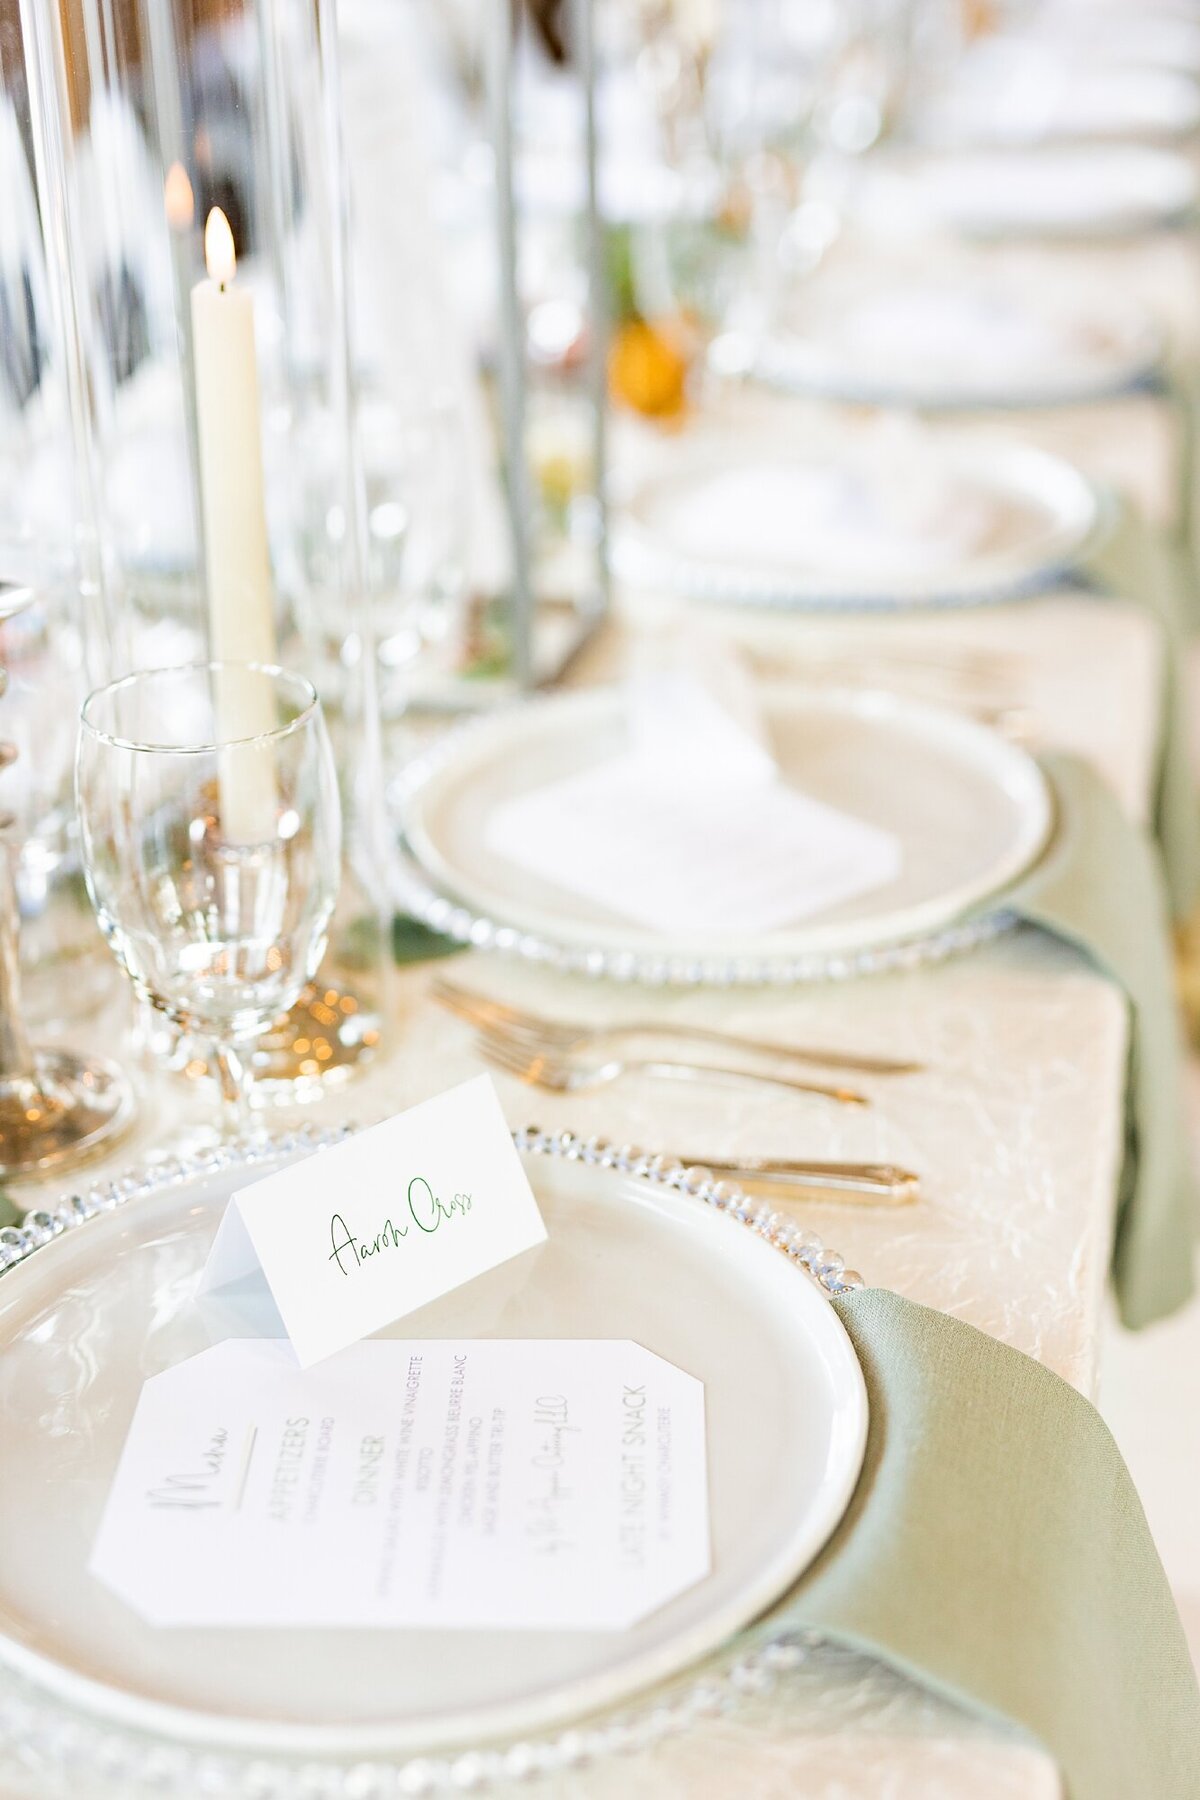 ivory and sage wedding reception plates, chargers, napkins, and menus